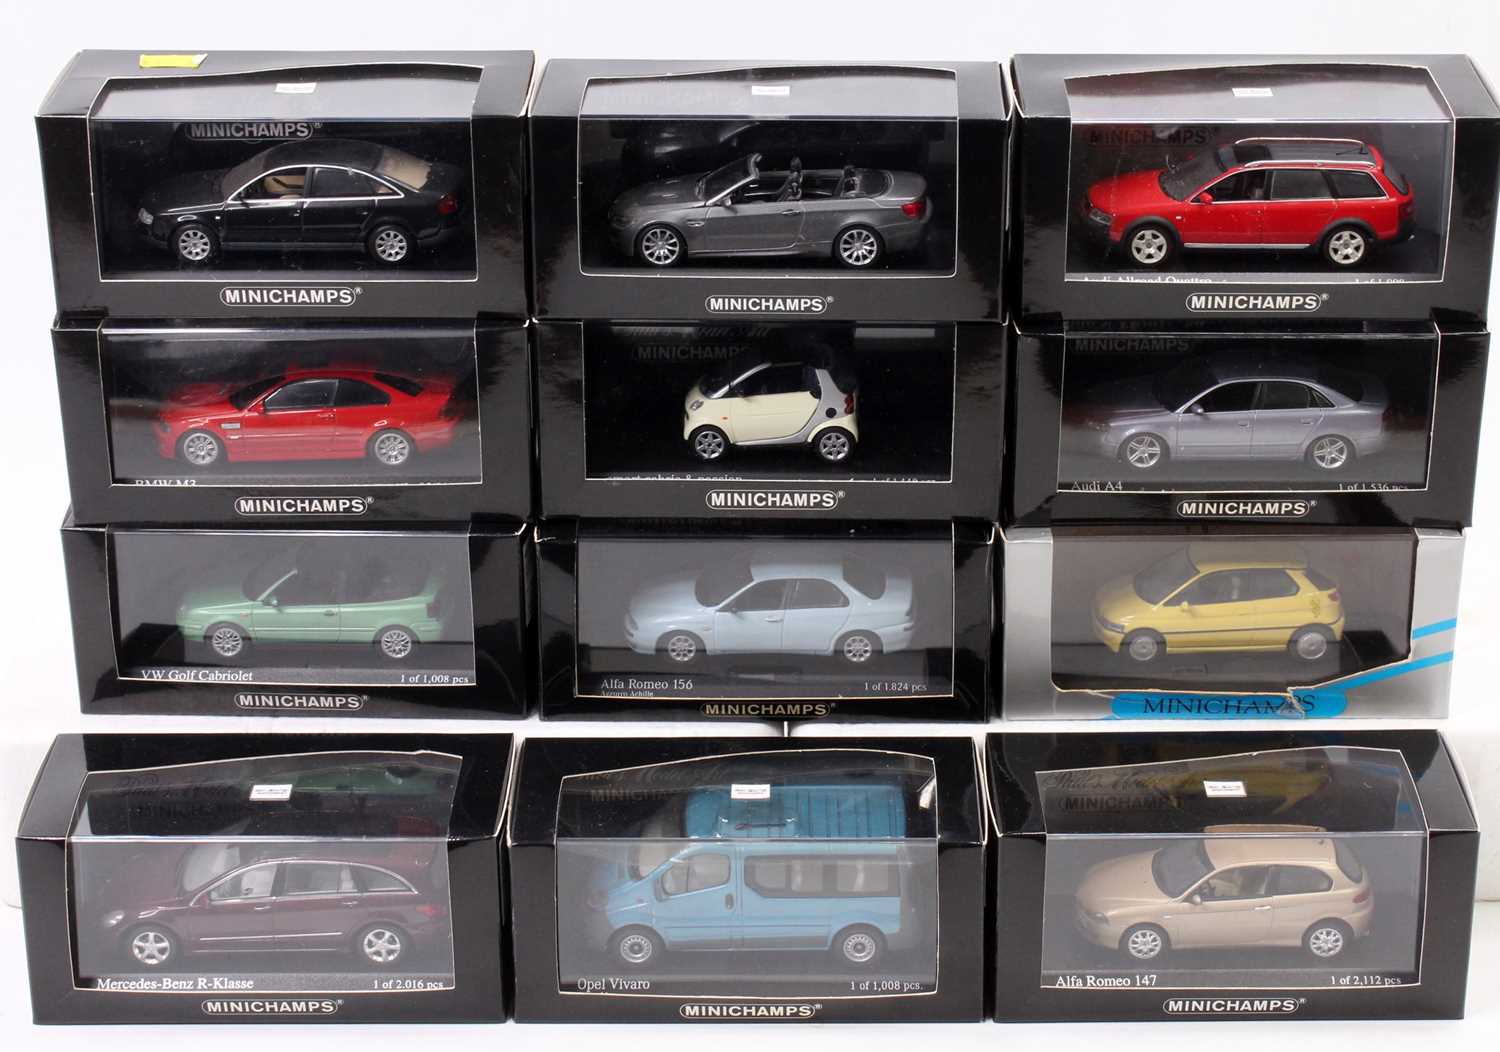 12 Minichamps 1/43rd scale diecasts, examples include No. 400 014400 Audi A4 2004, No. 431 020022